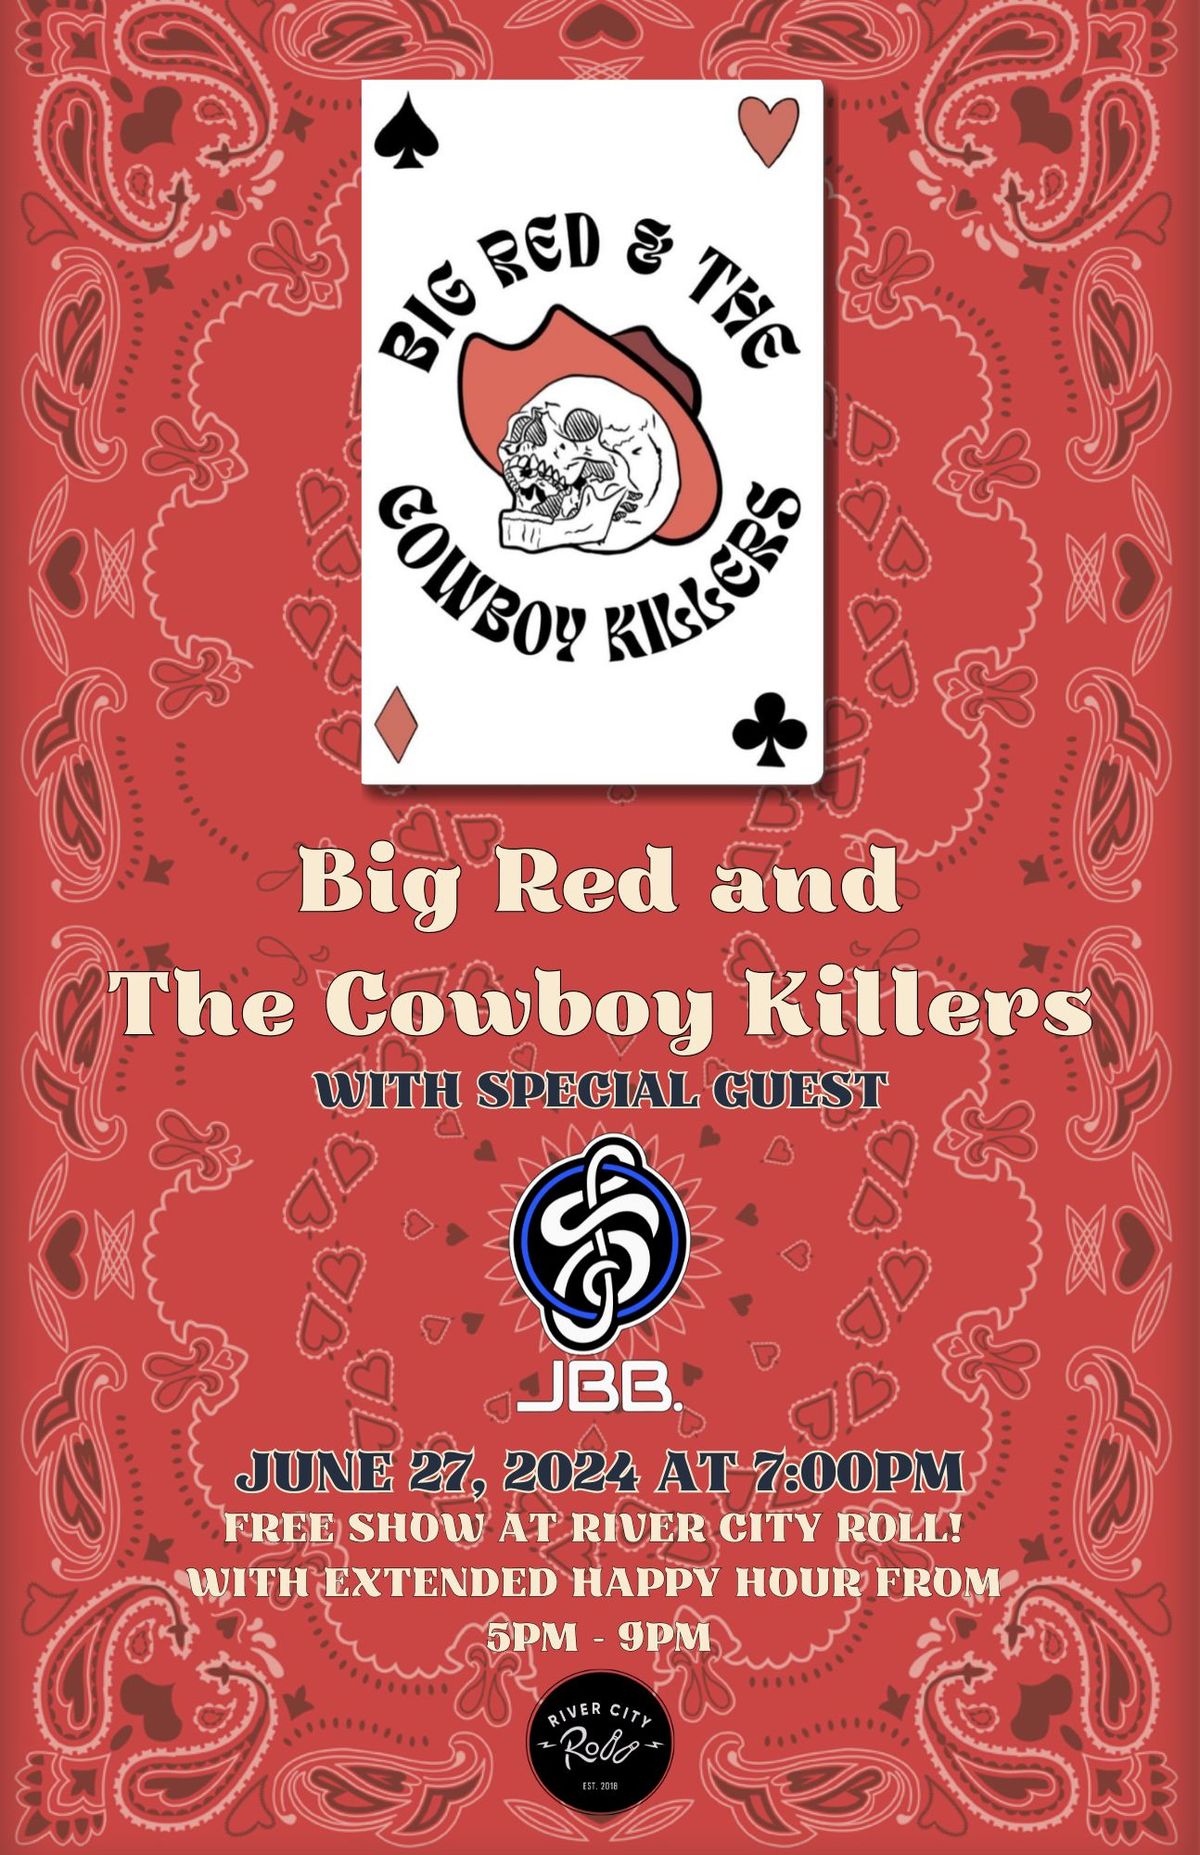 Big Red and The Cowboy Killers with Special Guest: JBB